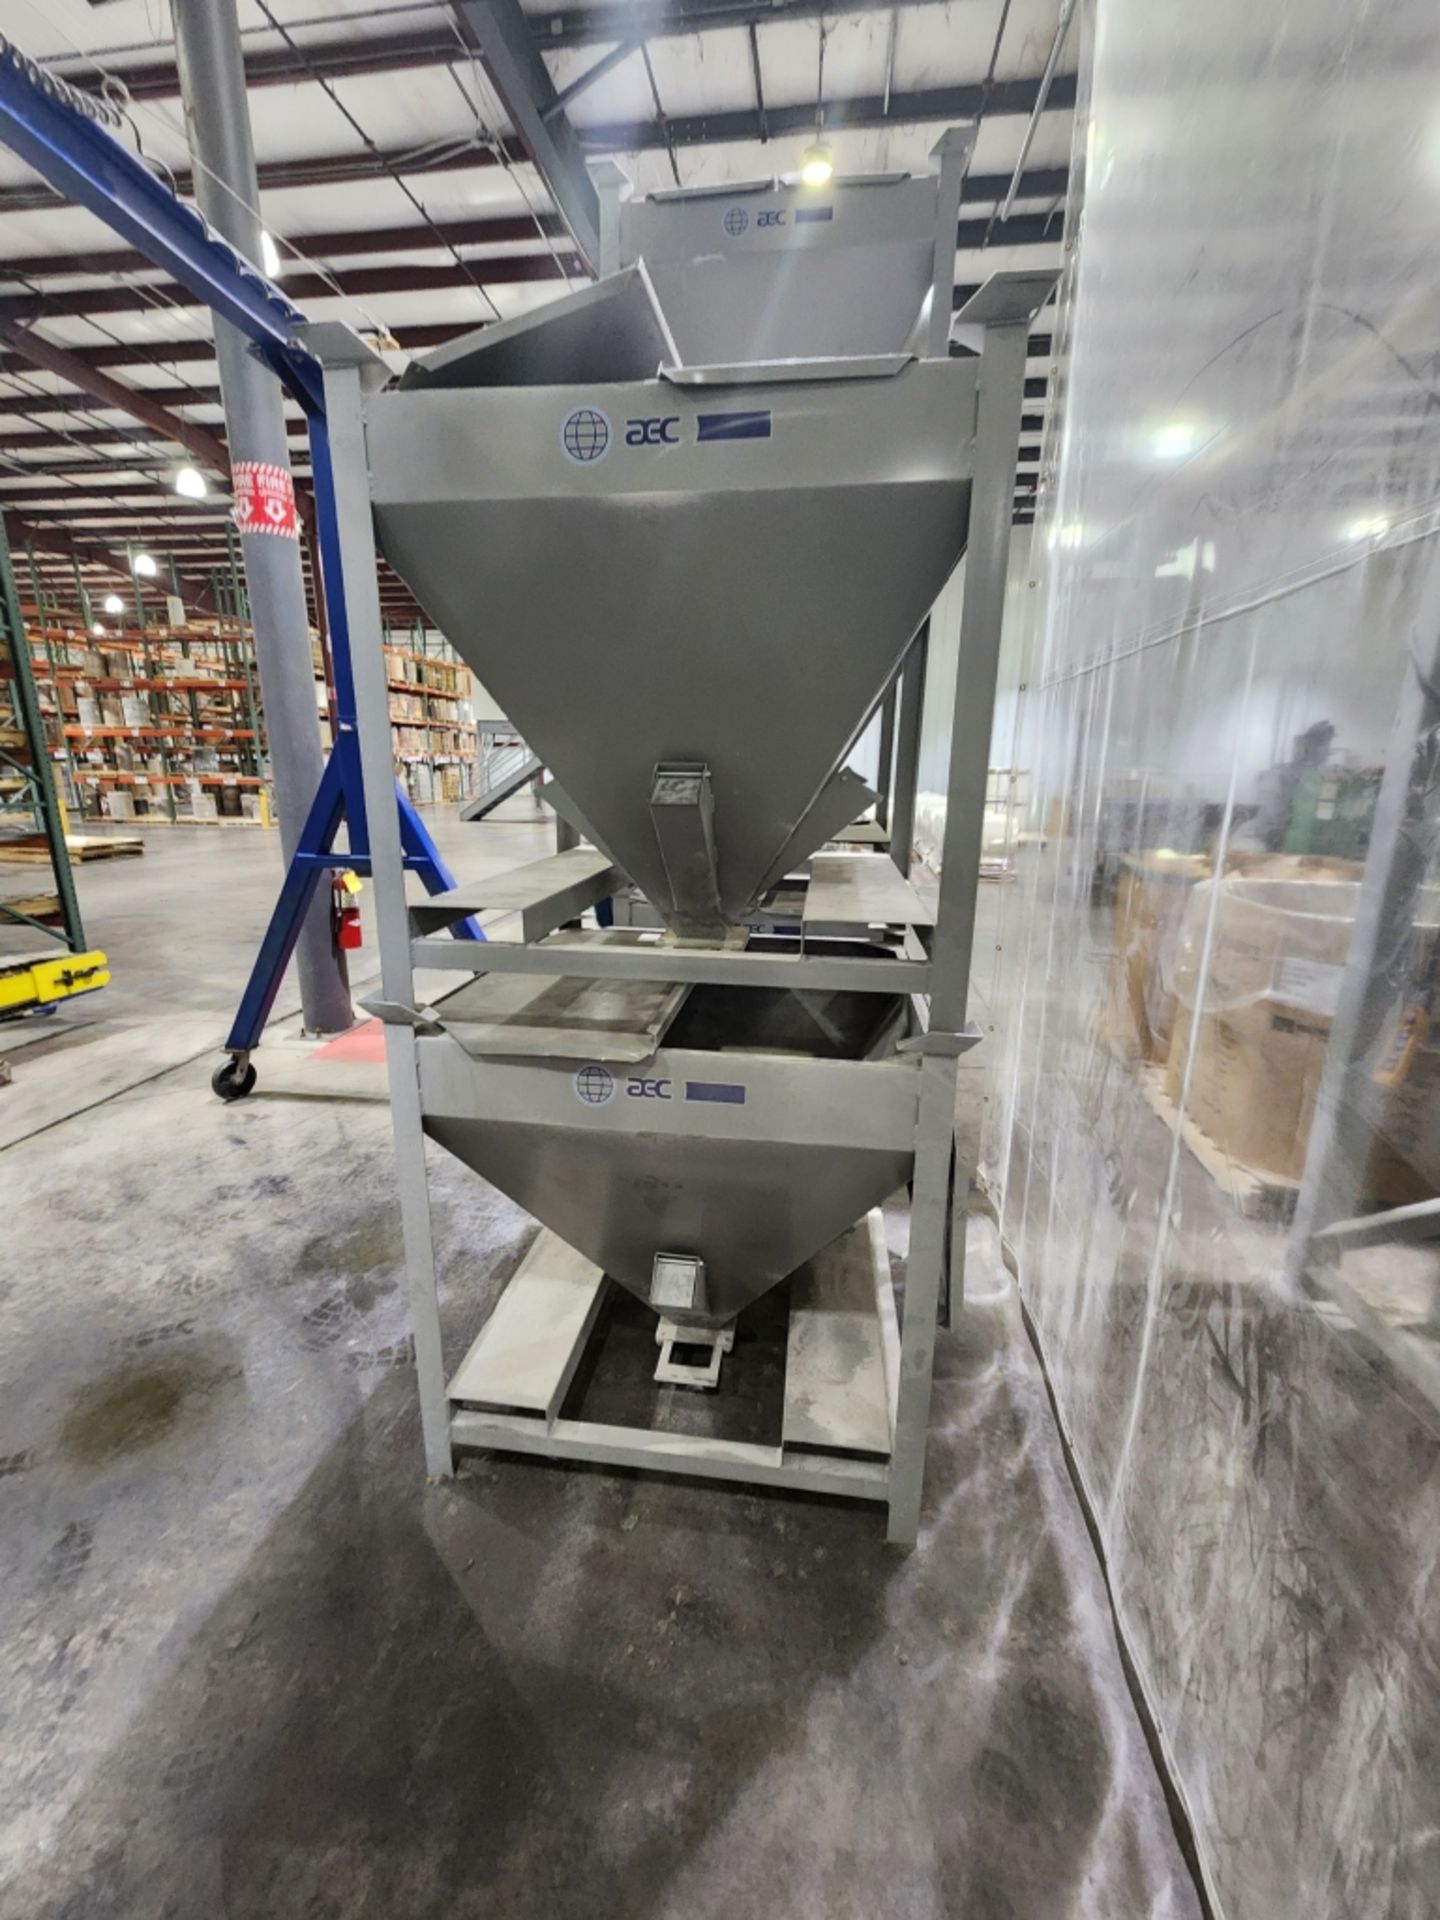 AEC bulk bag unloader system, Model: A248675-01C SN: E101810227-3-1, with five spare bins - Image 7 of 8